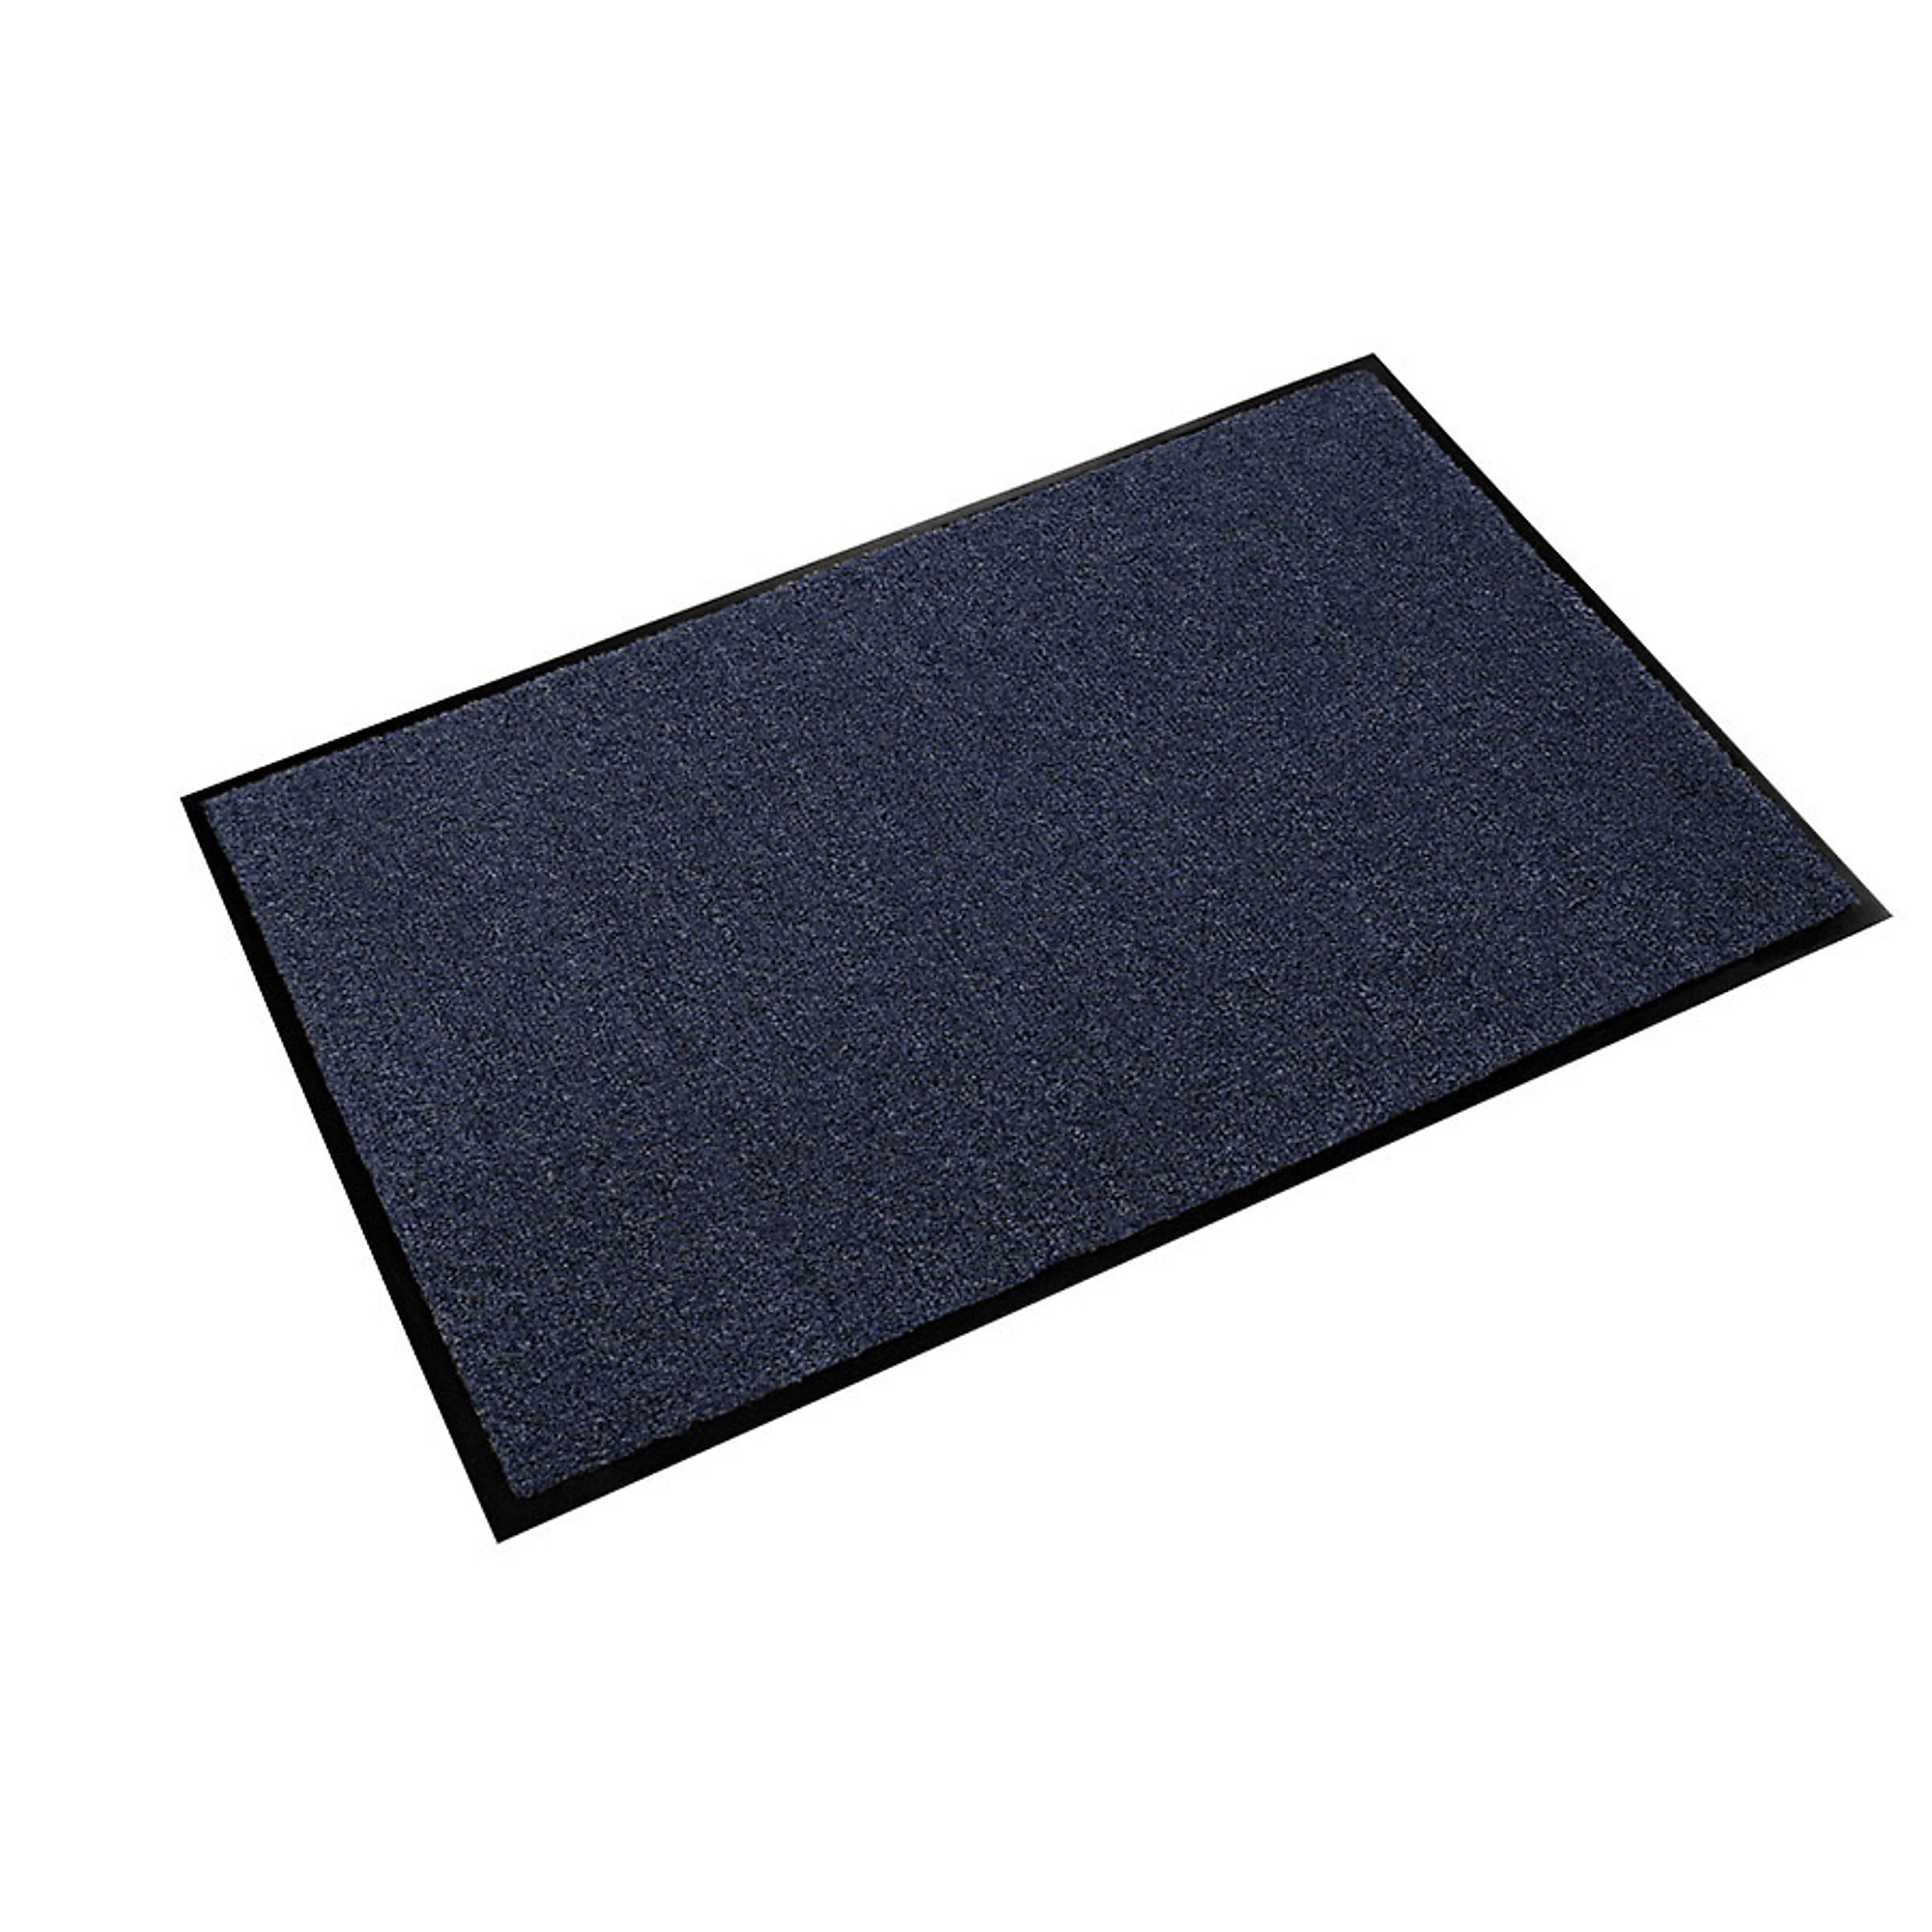 Crown Matting Technologies, Rely-On Olefin 4ft.x6ft. Navy Blue, Width 48 in, Length 72 in, Thickness 3/8 in, Model GS 0046NB